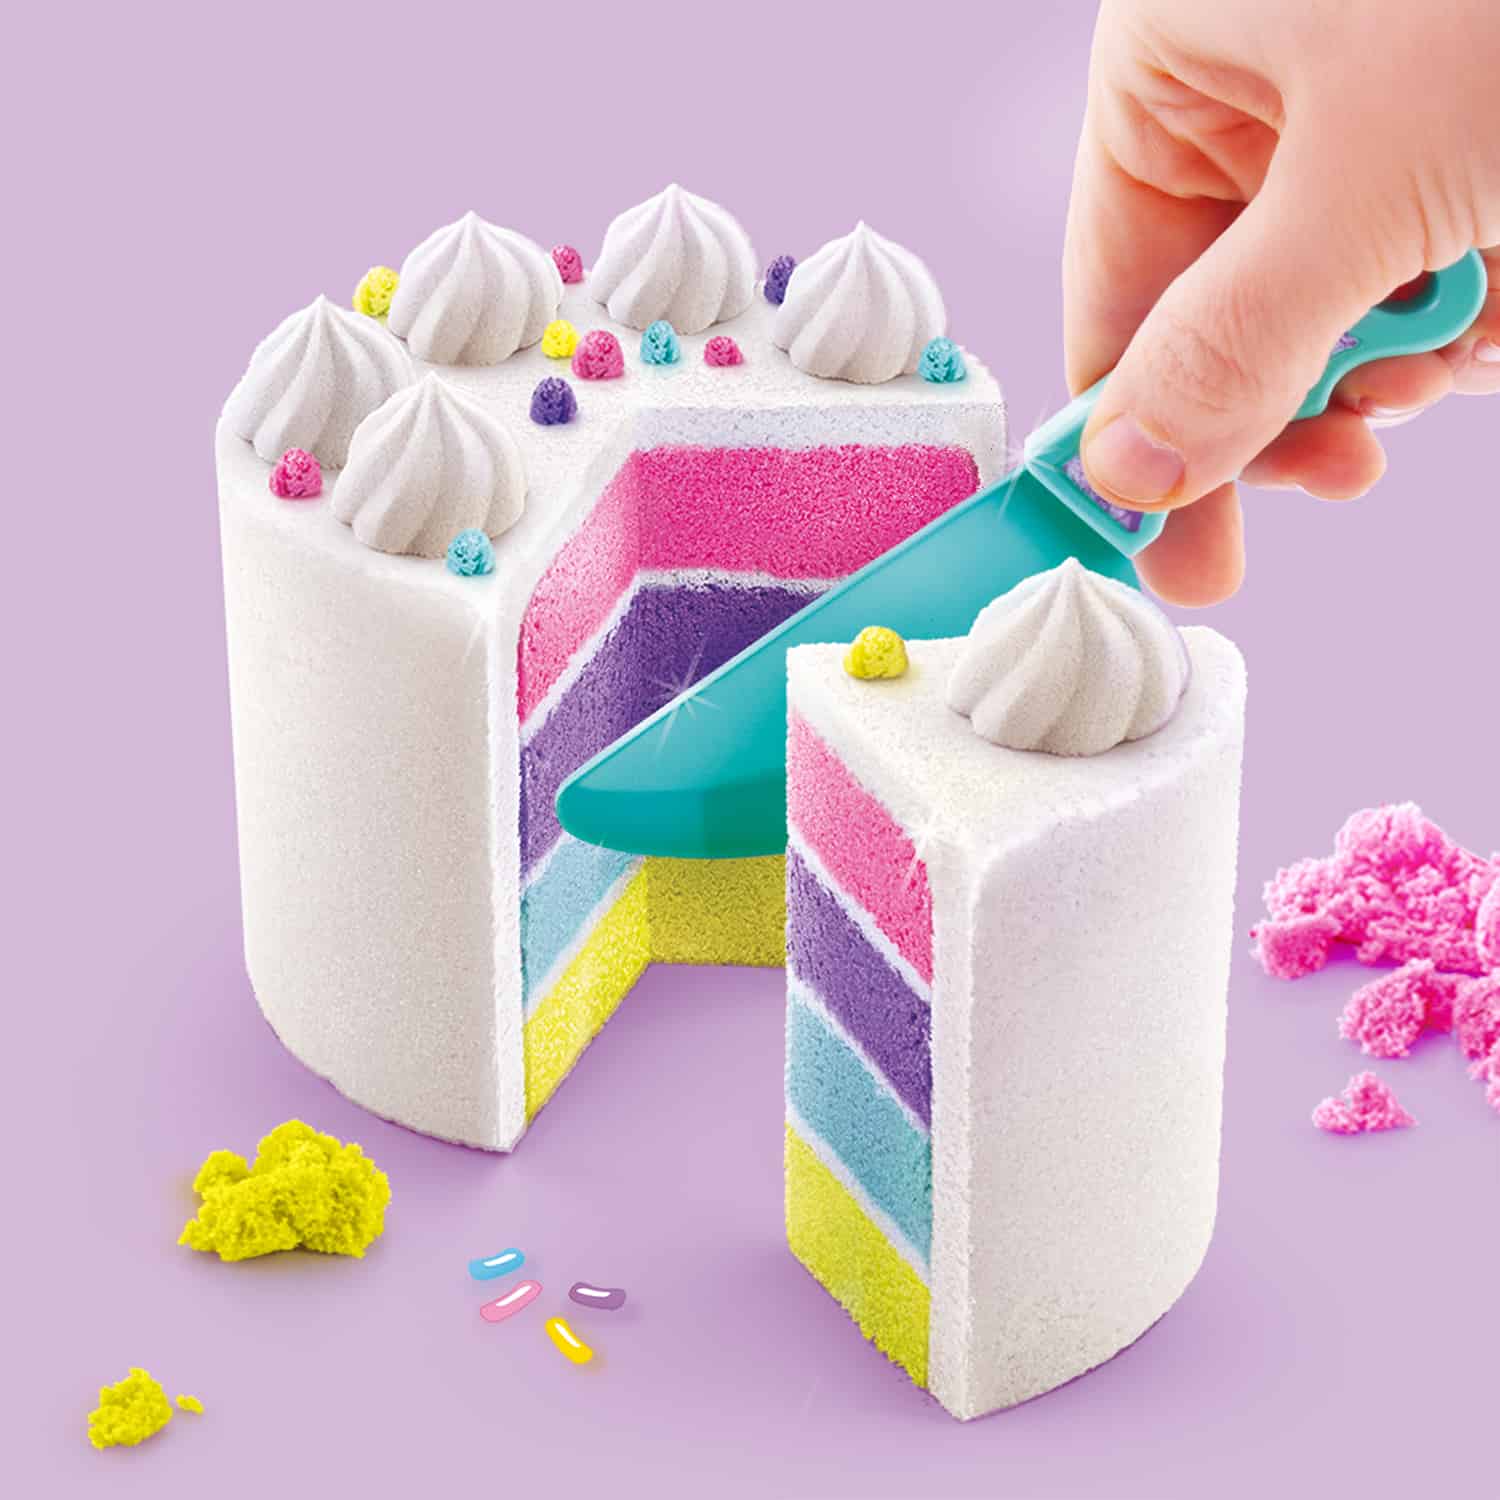 Canal Toys Satisfying Sand Kit, So Sand DIY, 6+